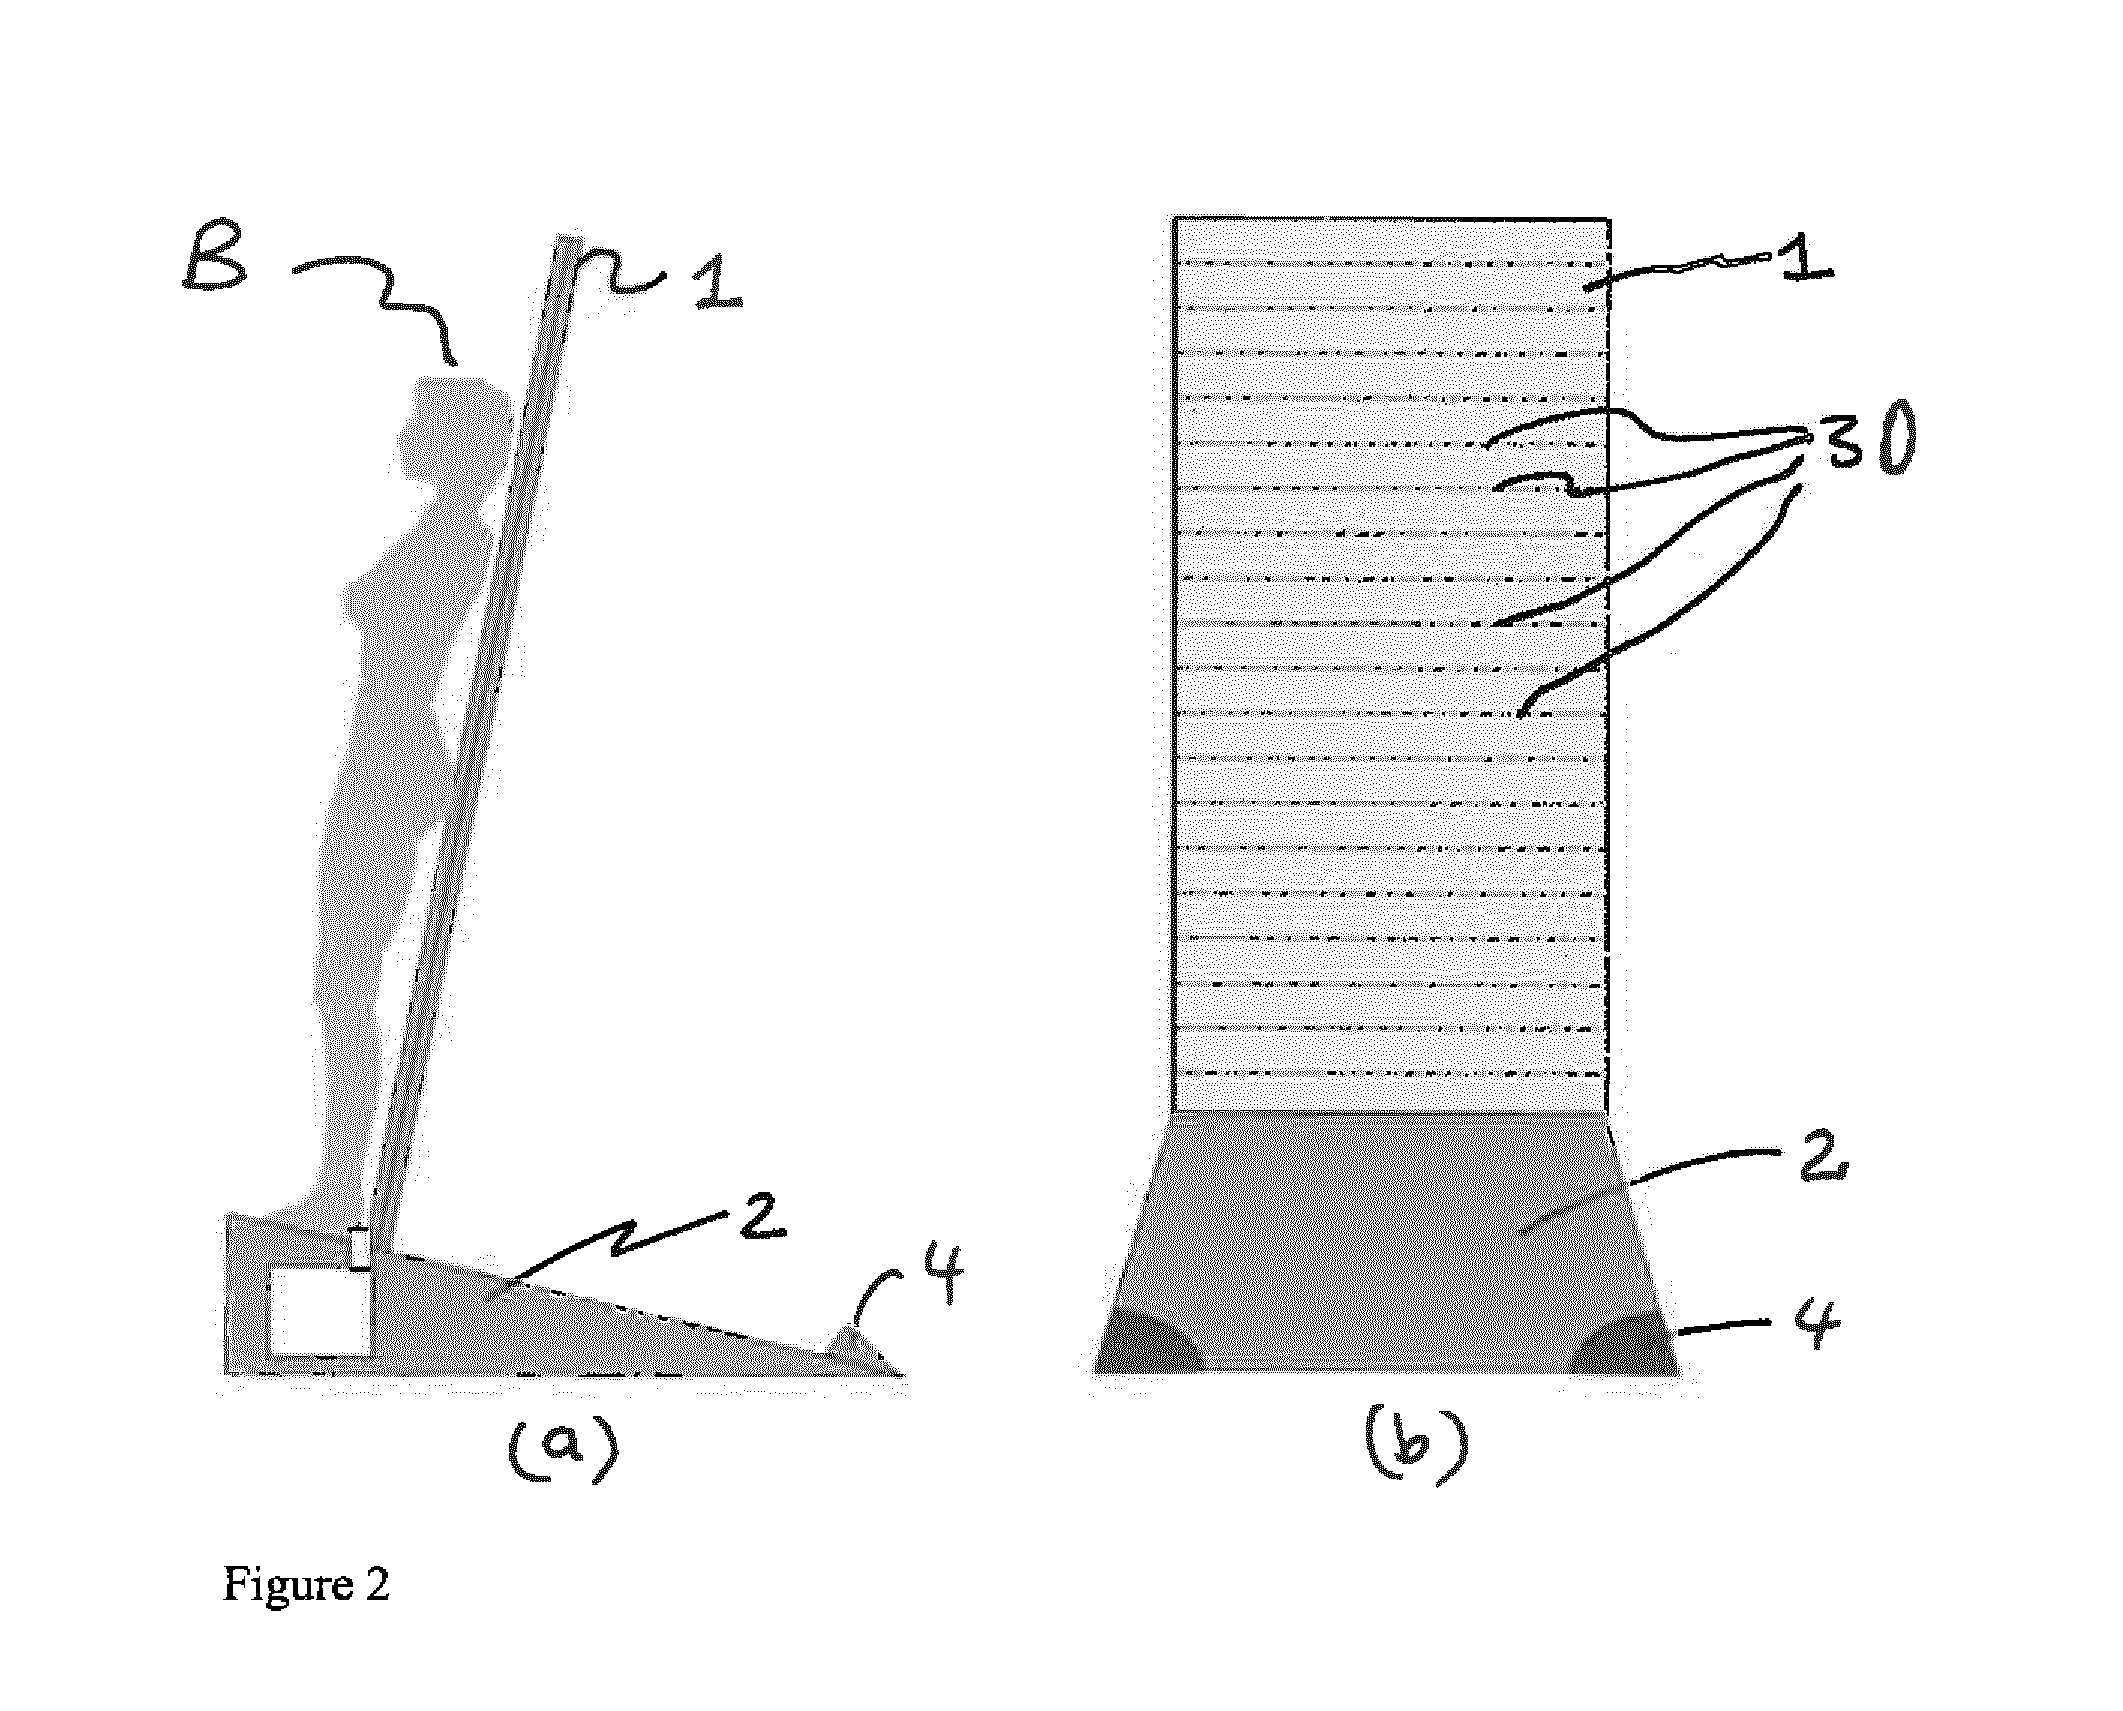 A system, apparatus and method for measuring body characteristics